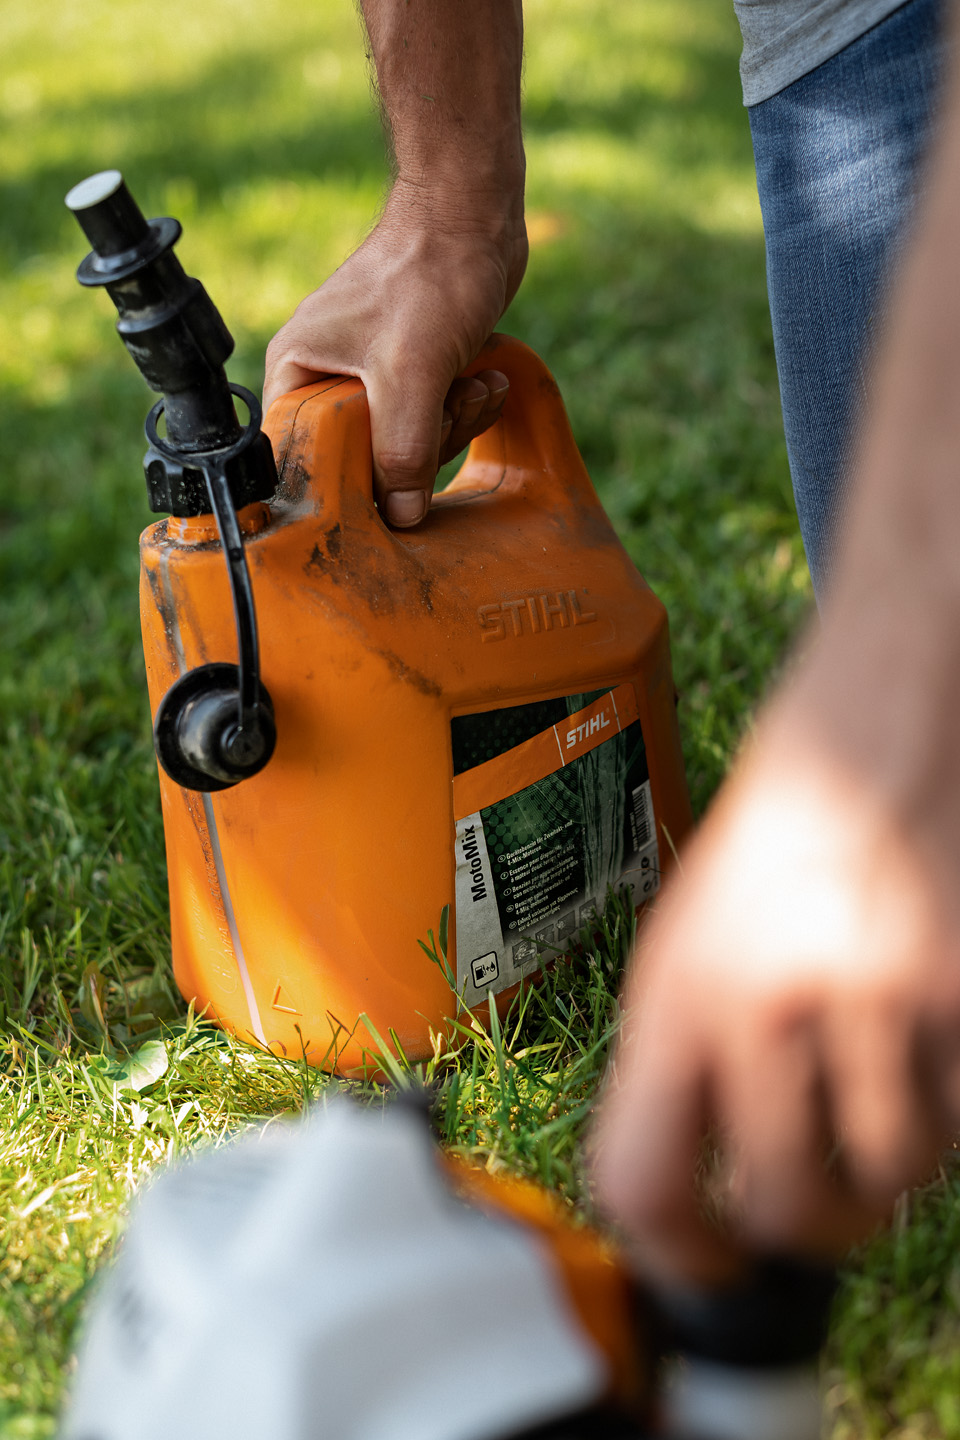 An open canister of STIHL MotoMix fuel standing on grass, with a hand in the foreground unscrewing the fuel cap on a grass trimmer.